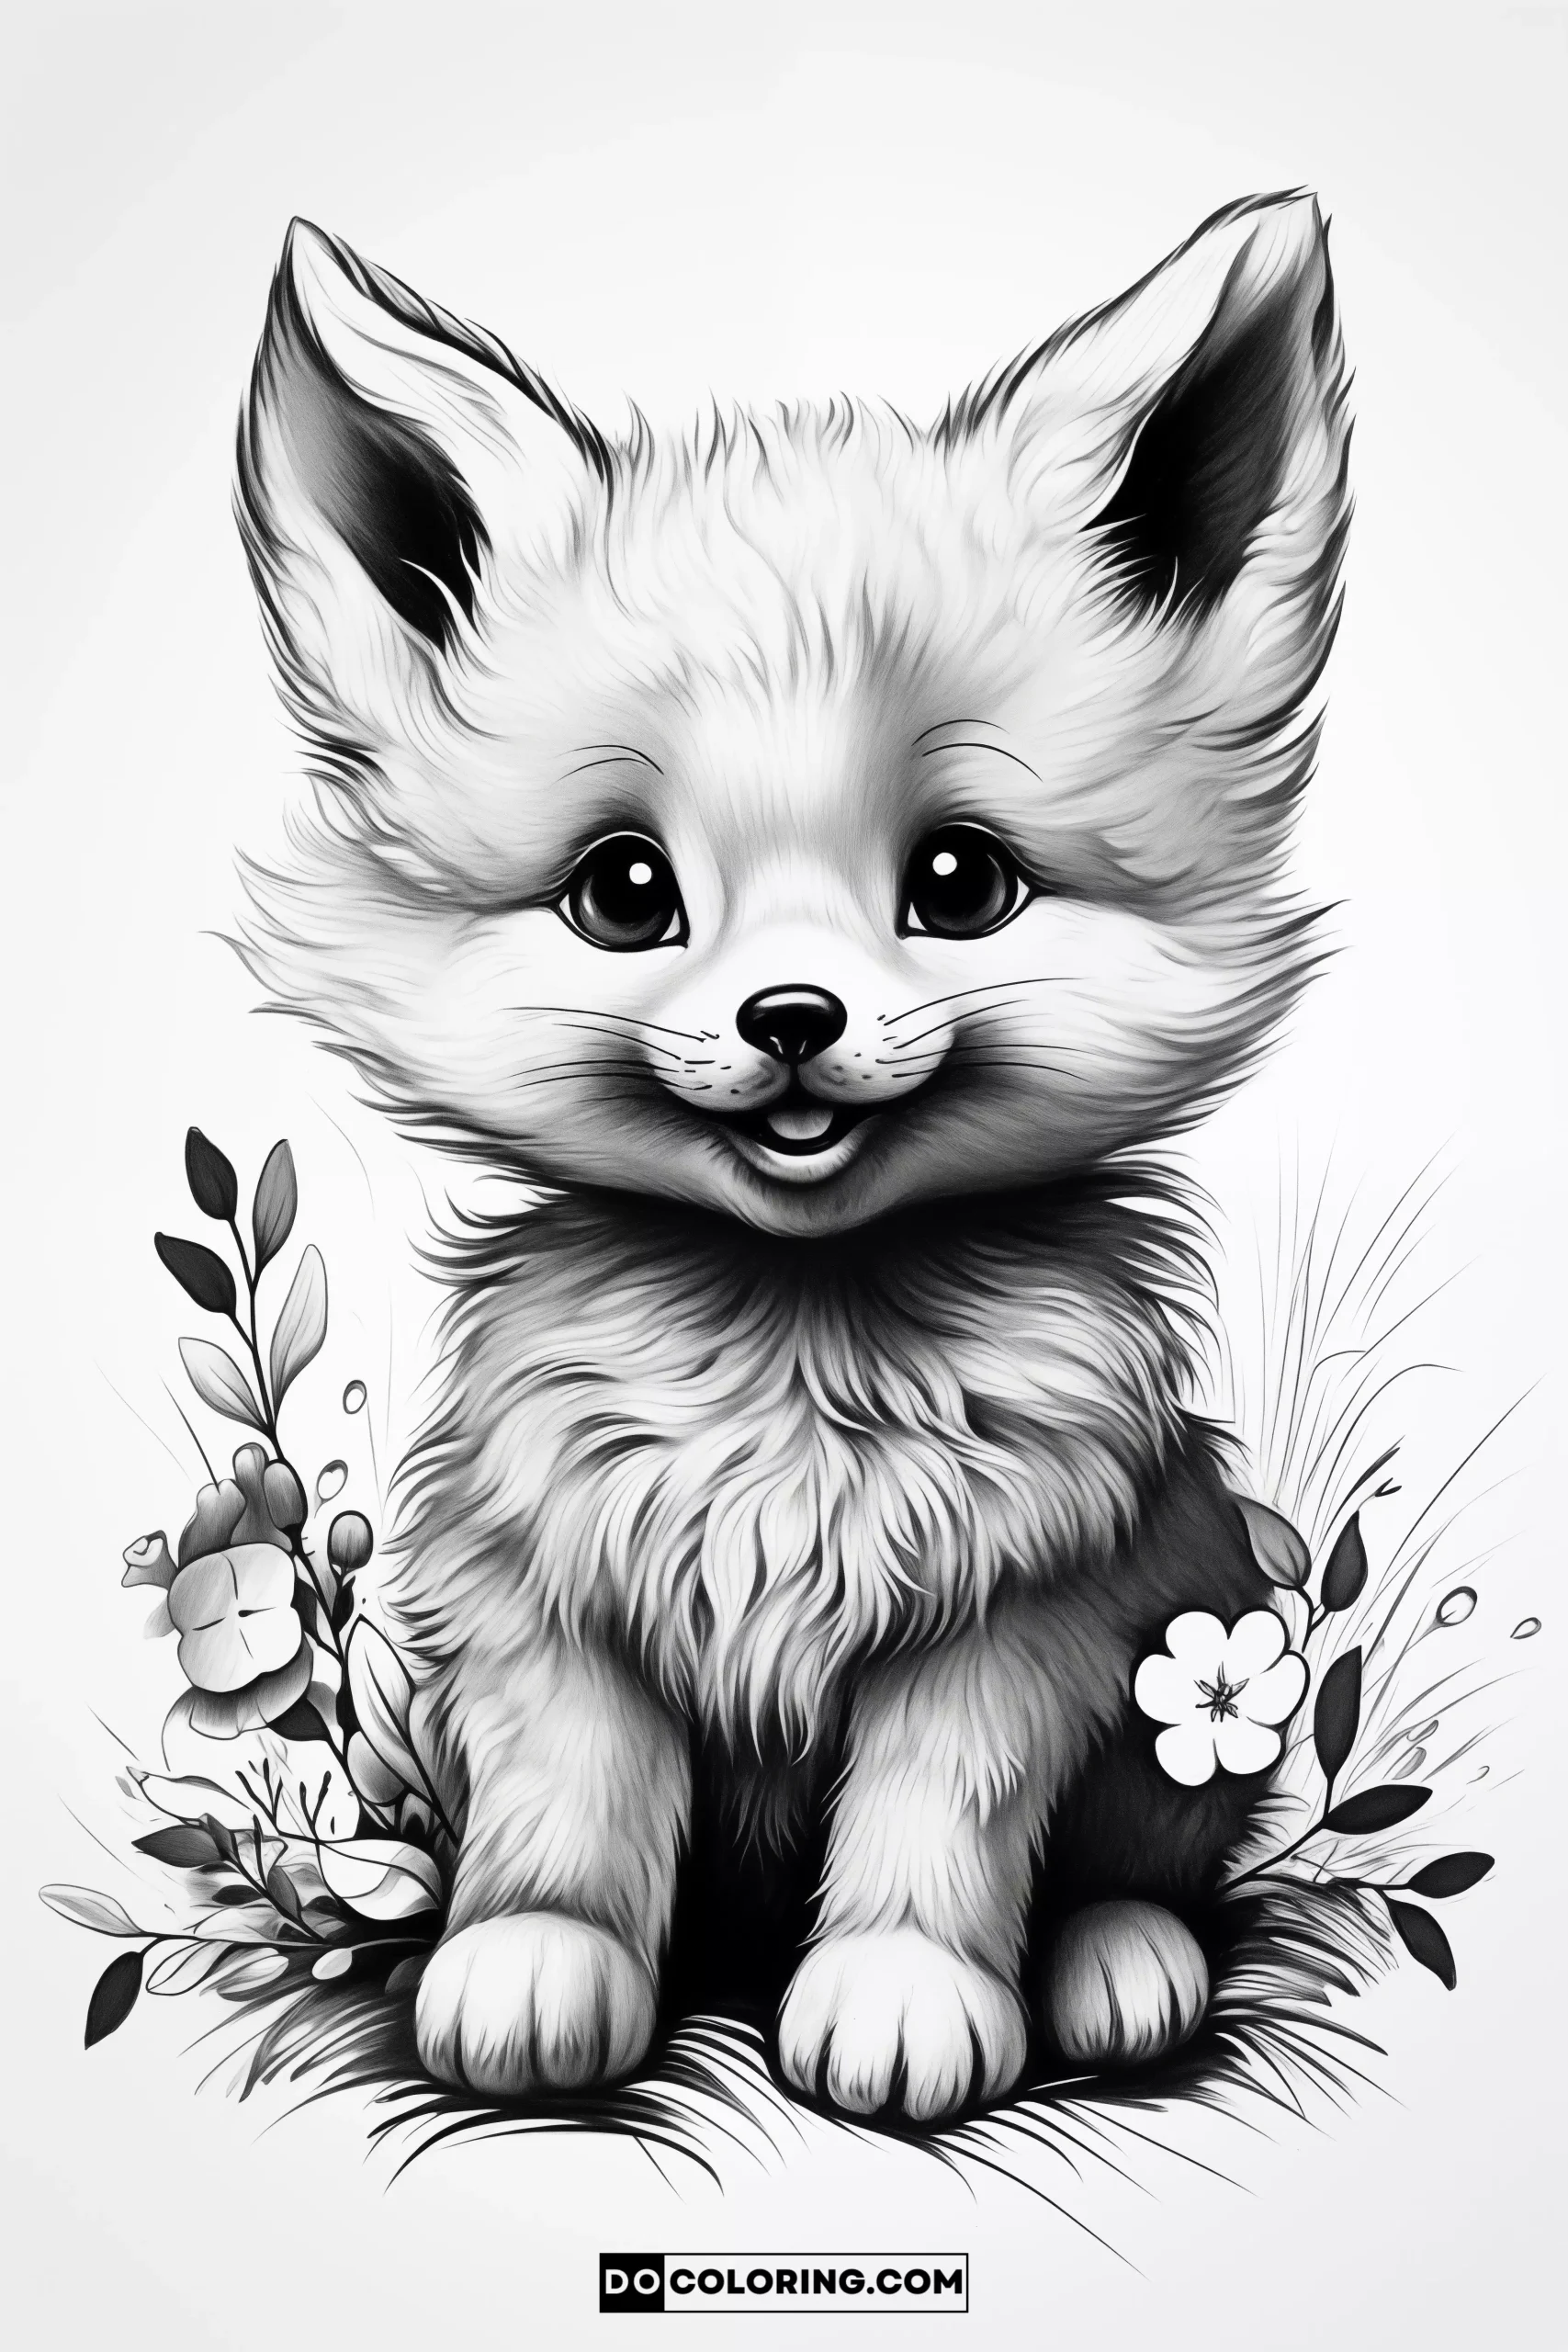 Realistic Baby Fox Illustration with Detailed Fur Patterns, Coloring Page